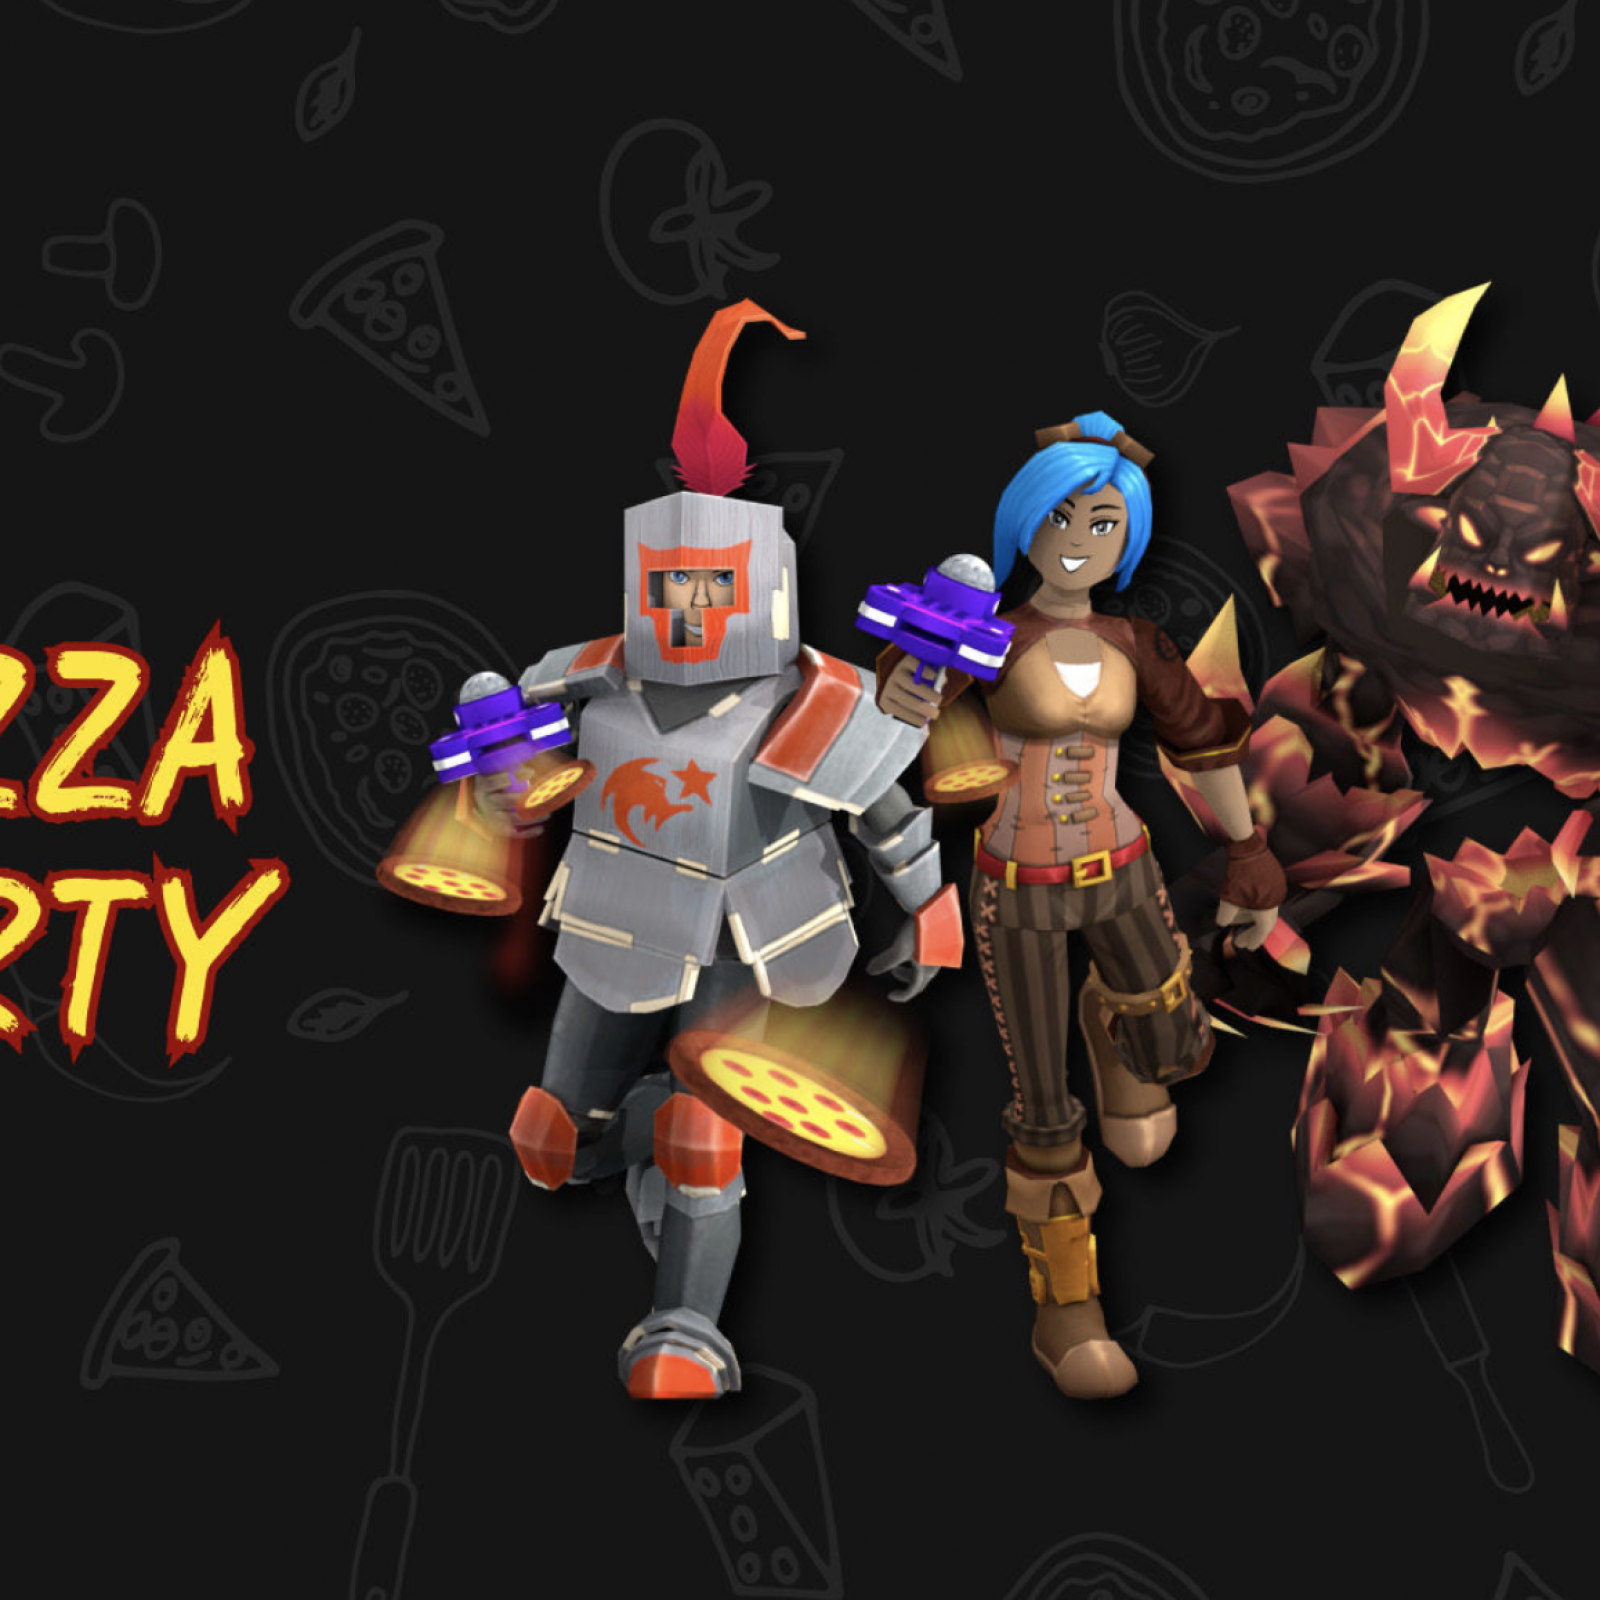 Roblox Pizza Party Event Guide How To Get Boombox Backpack Pinata Hat And More - backpacking codes 2019 roblox